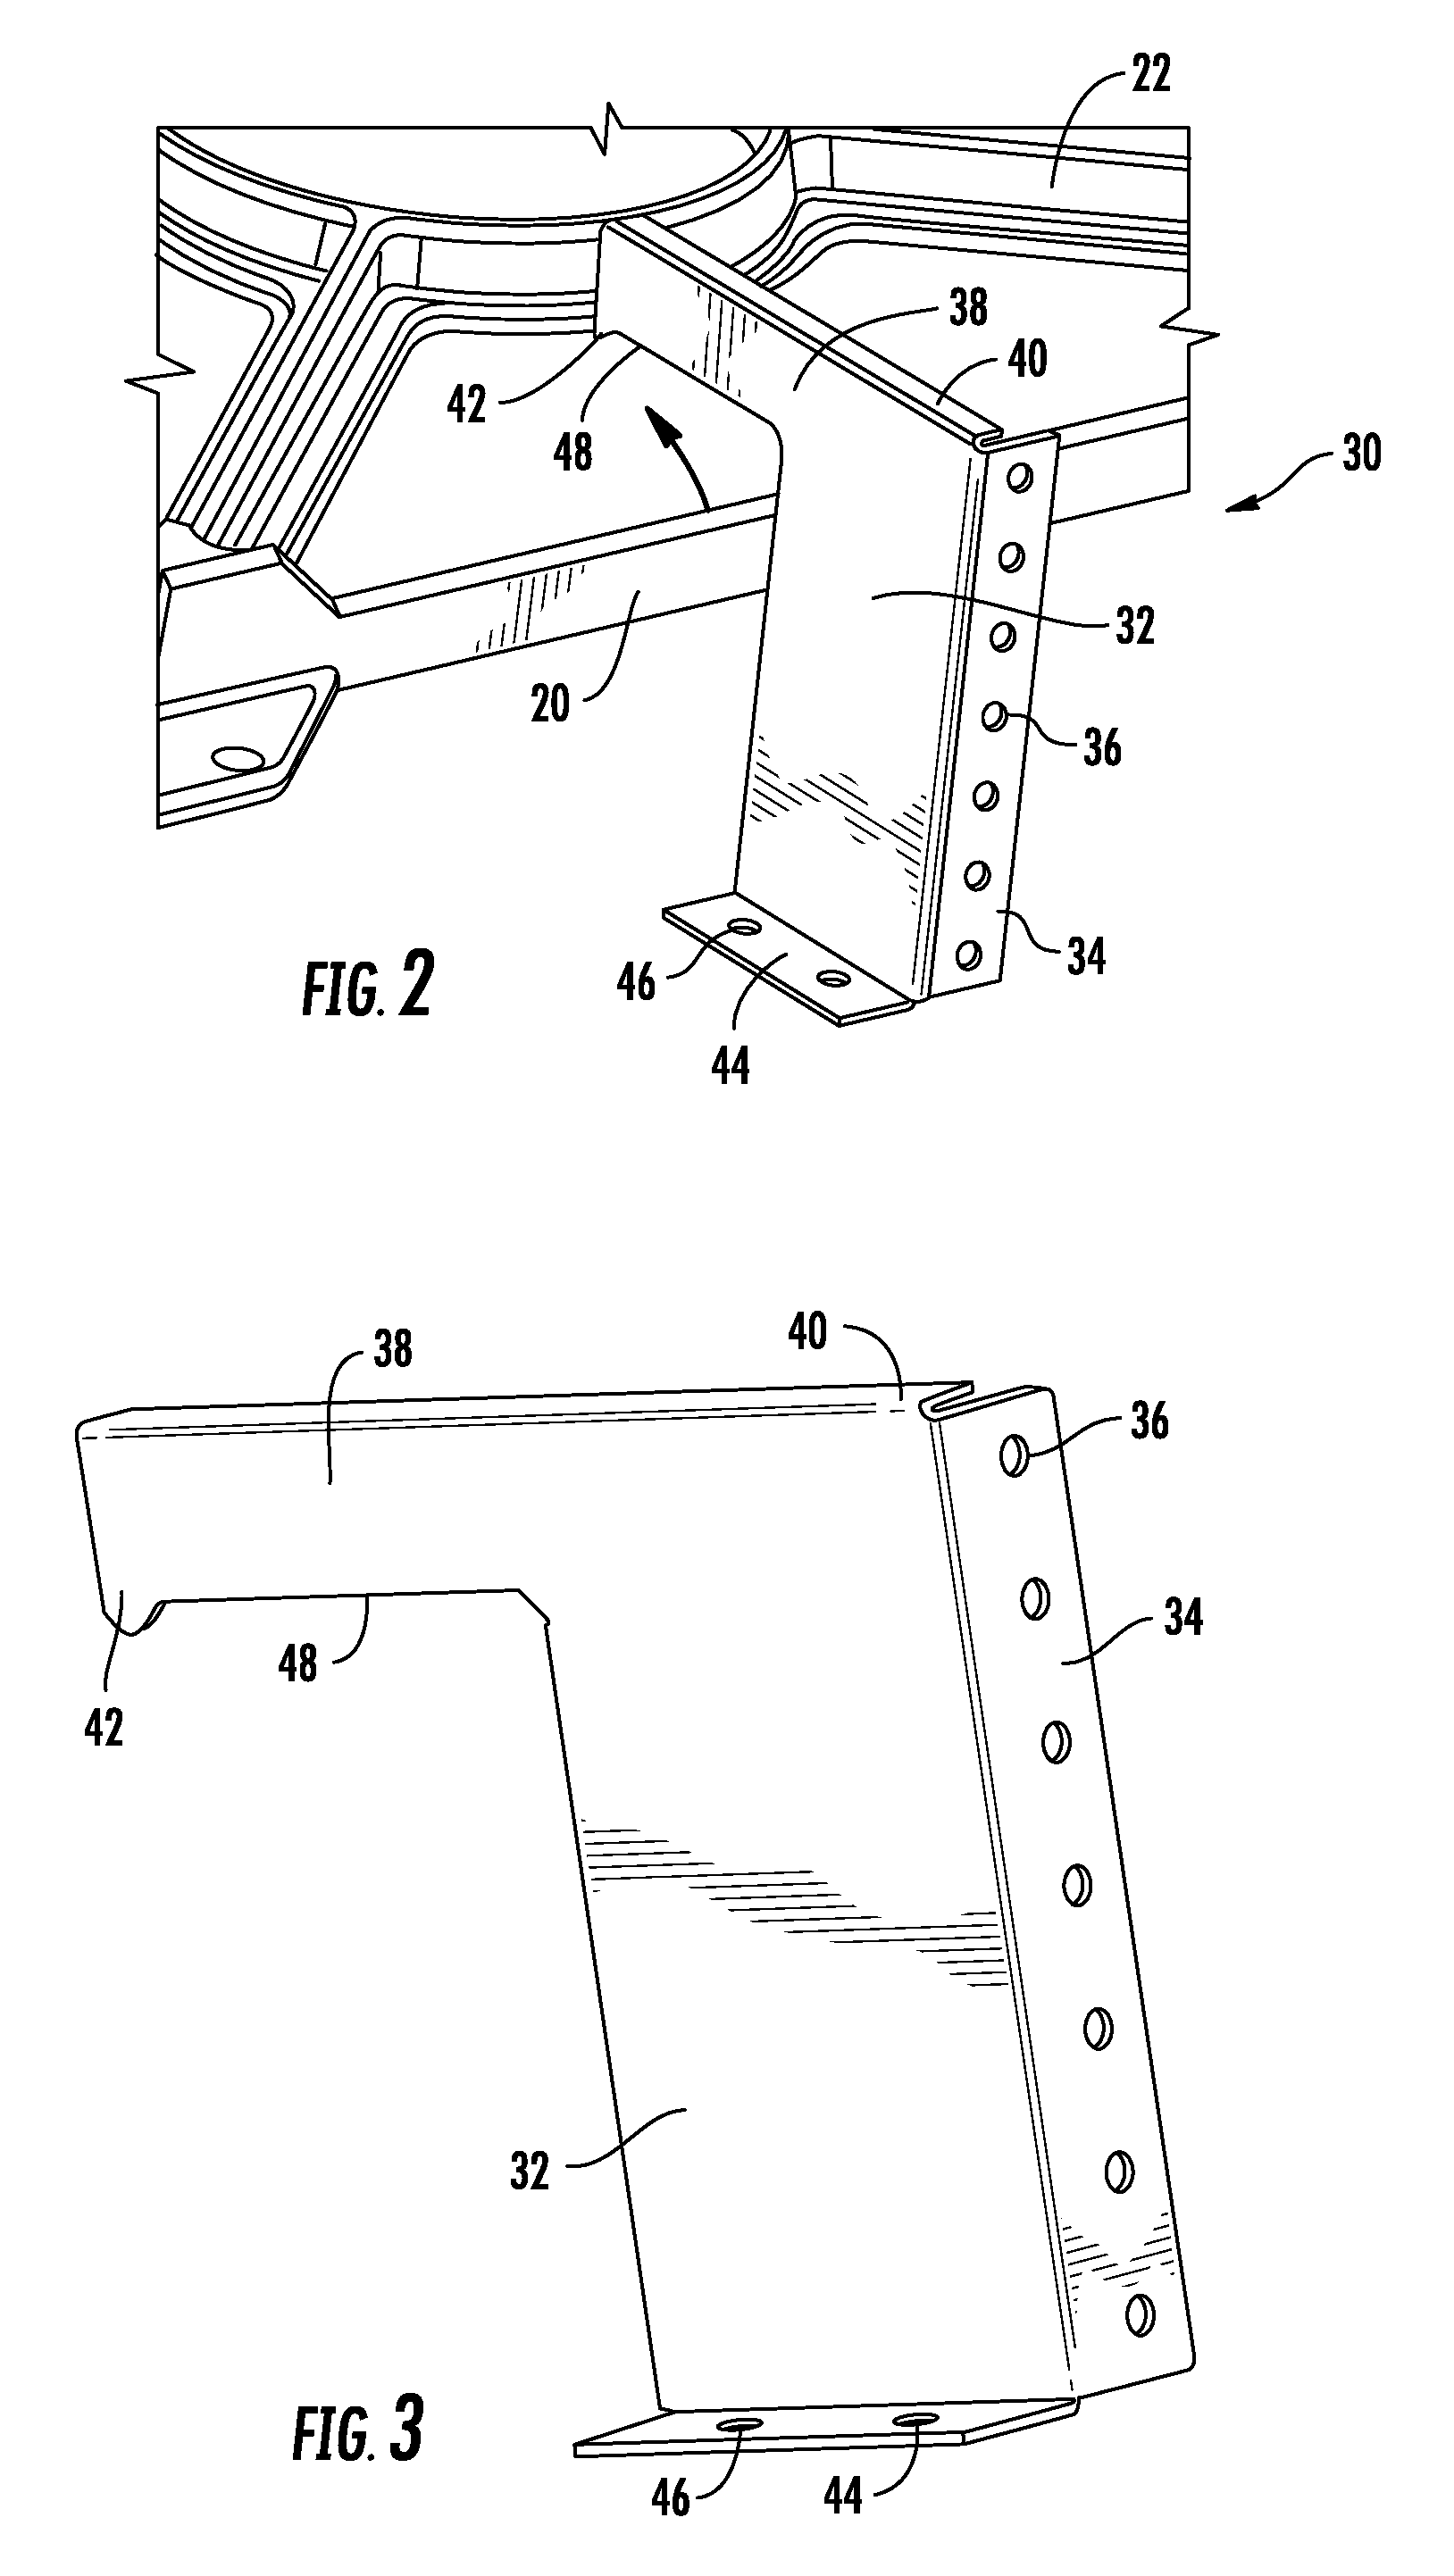 Home appliance with unitary anti-tip bracket